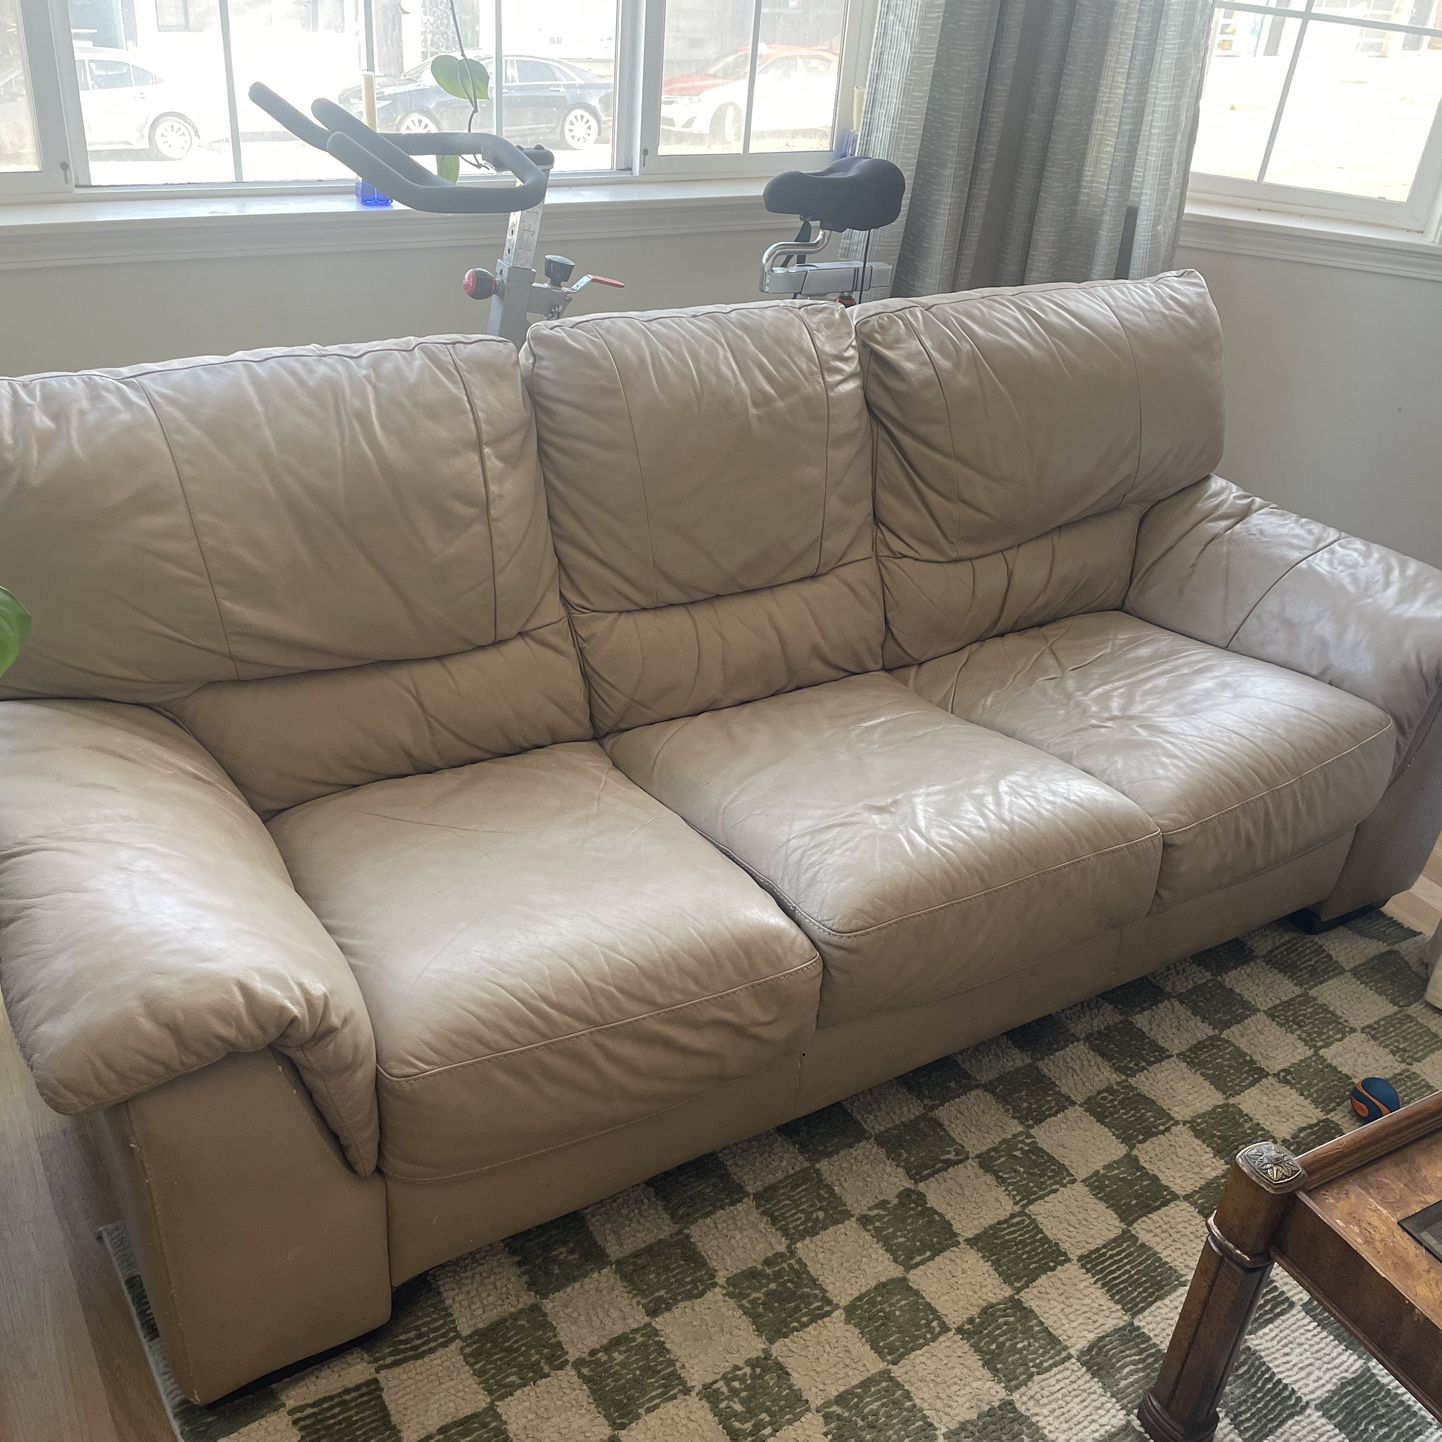 Large 4 Person Couch - Great Condition